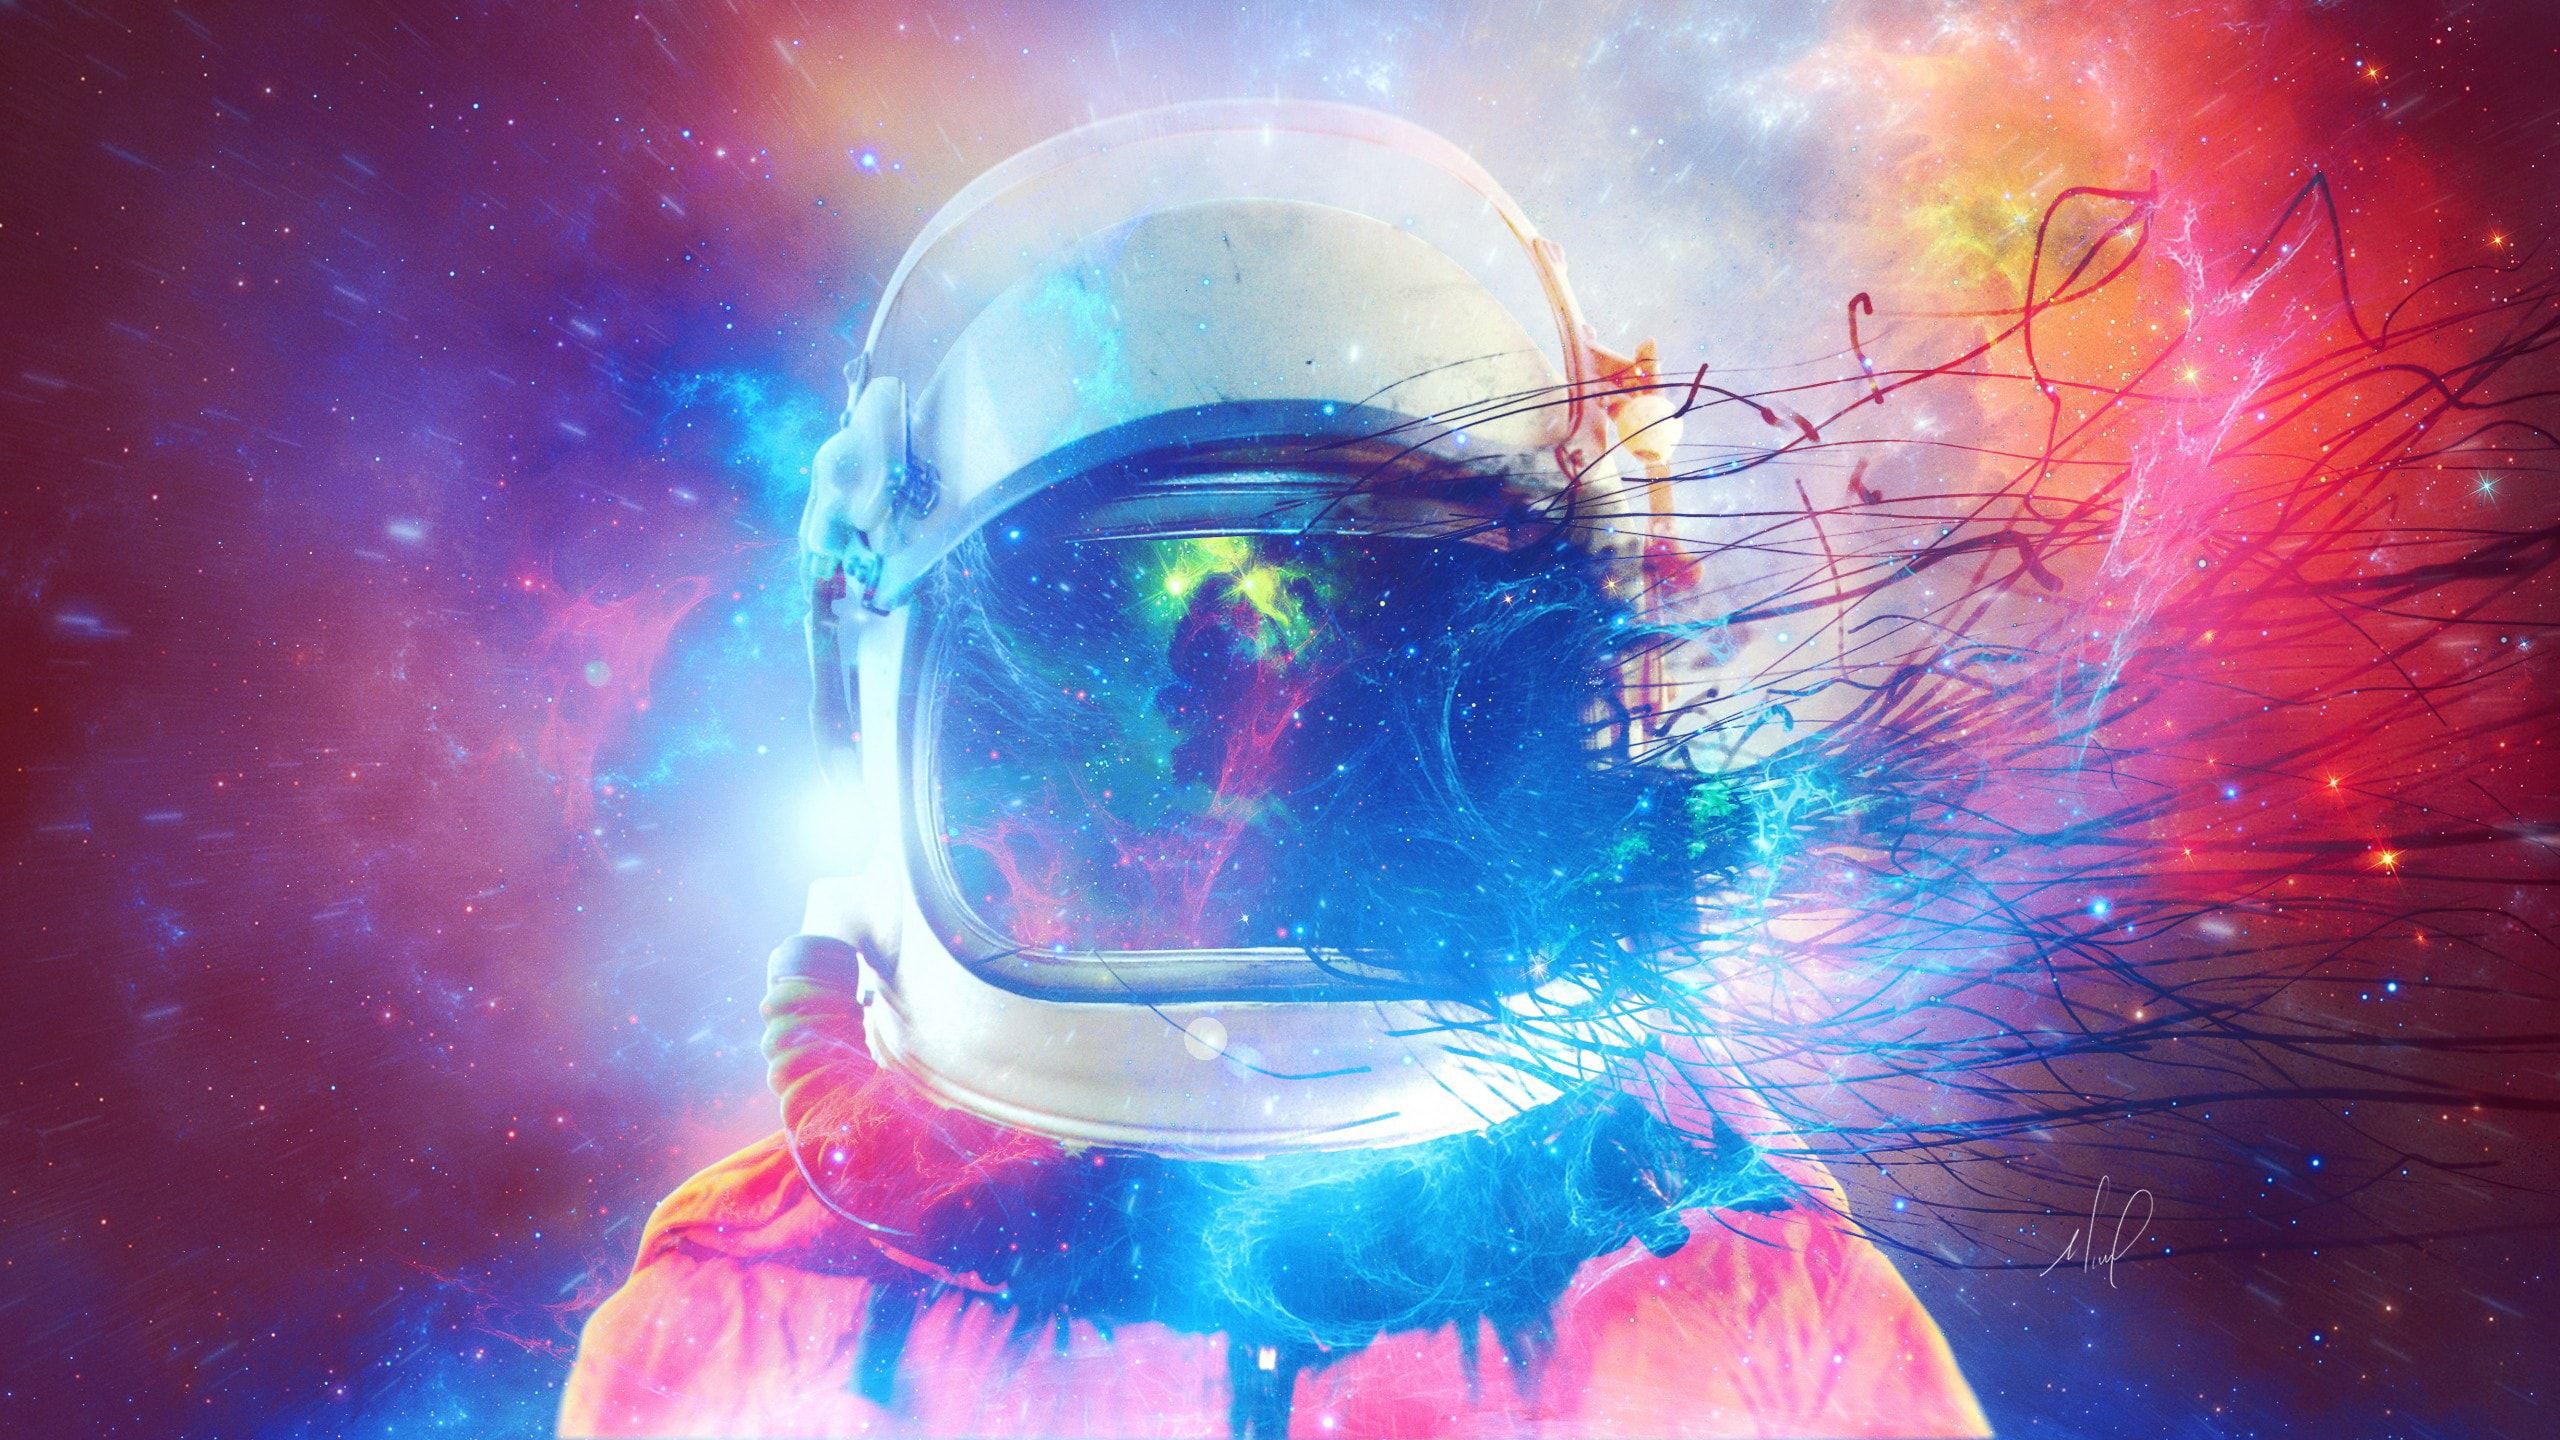 Abstract Astronaut Wallpaper Free Abstract Astronaut Background